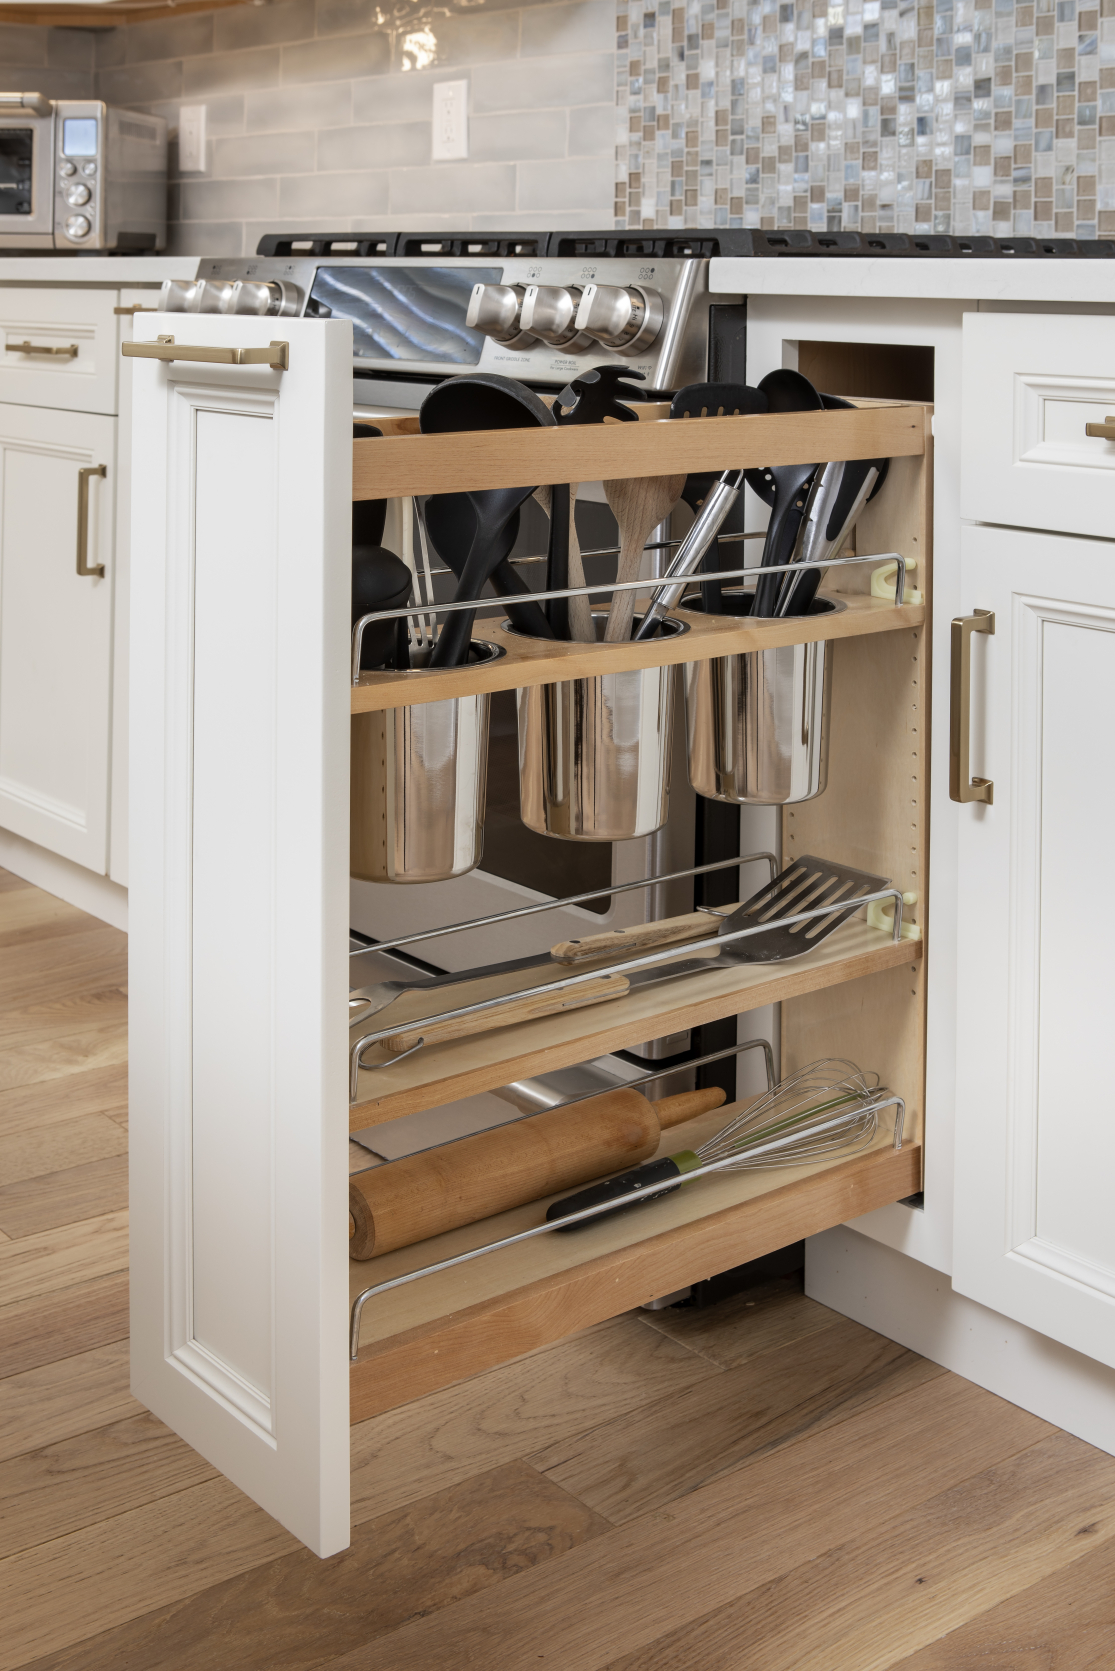 Types Of Cabinets Every Kitchen Must Have